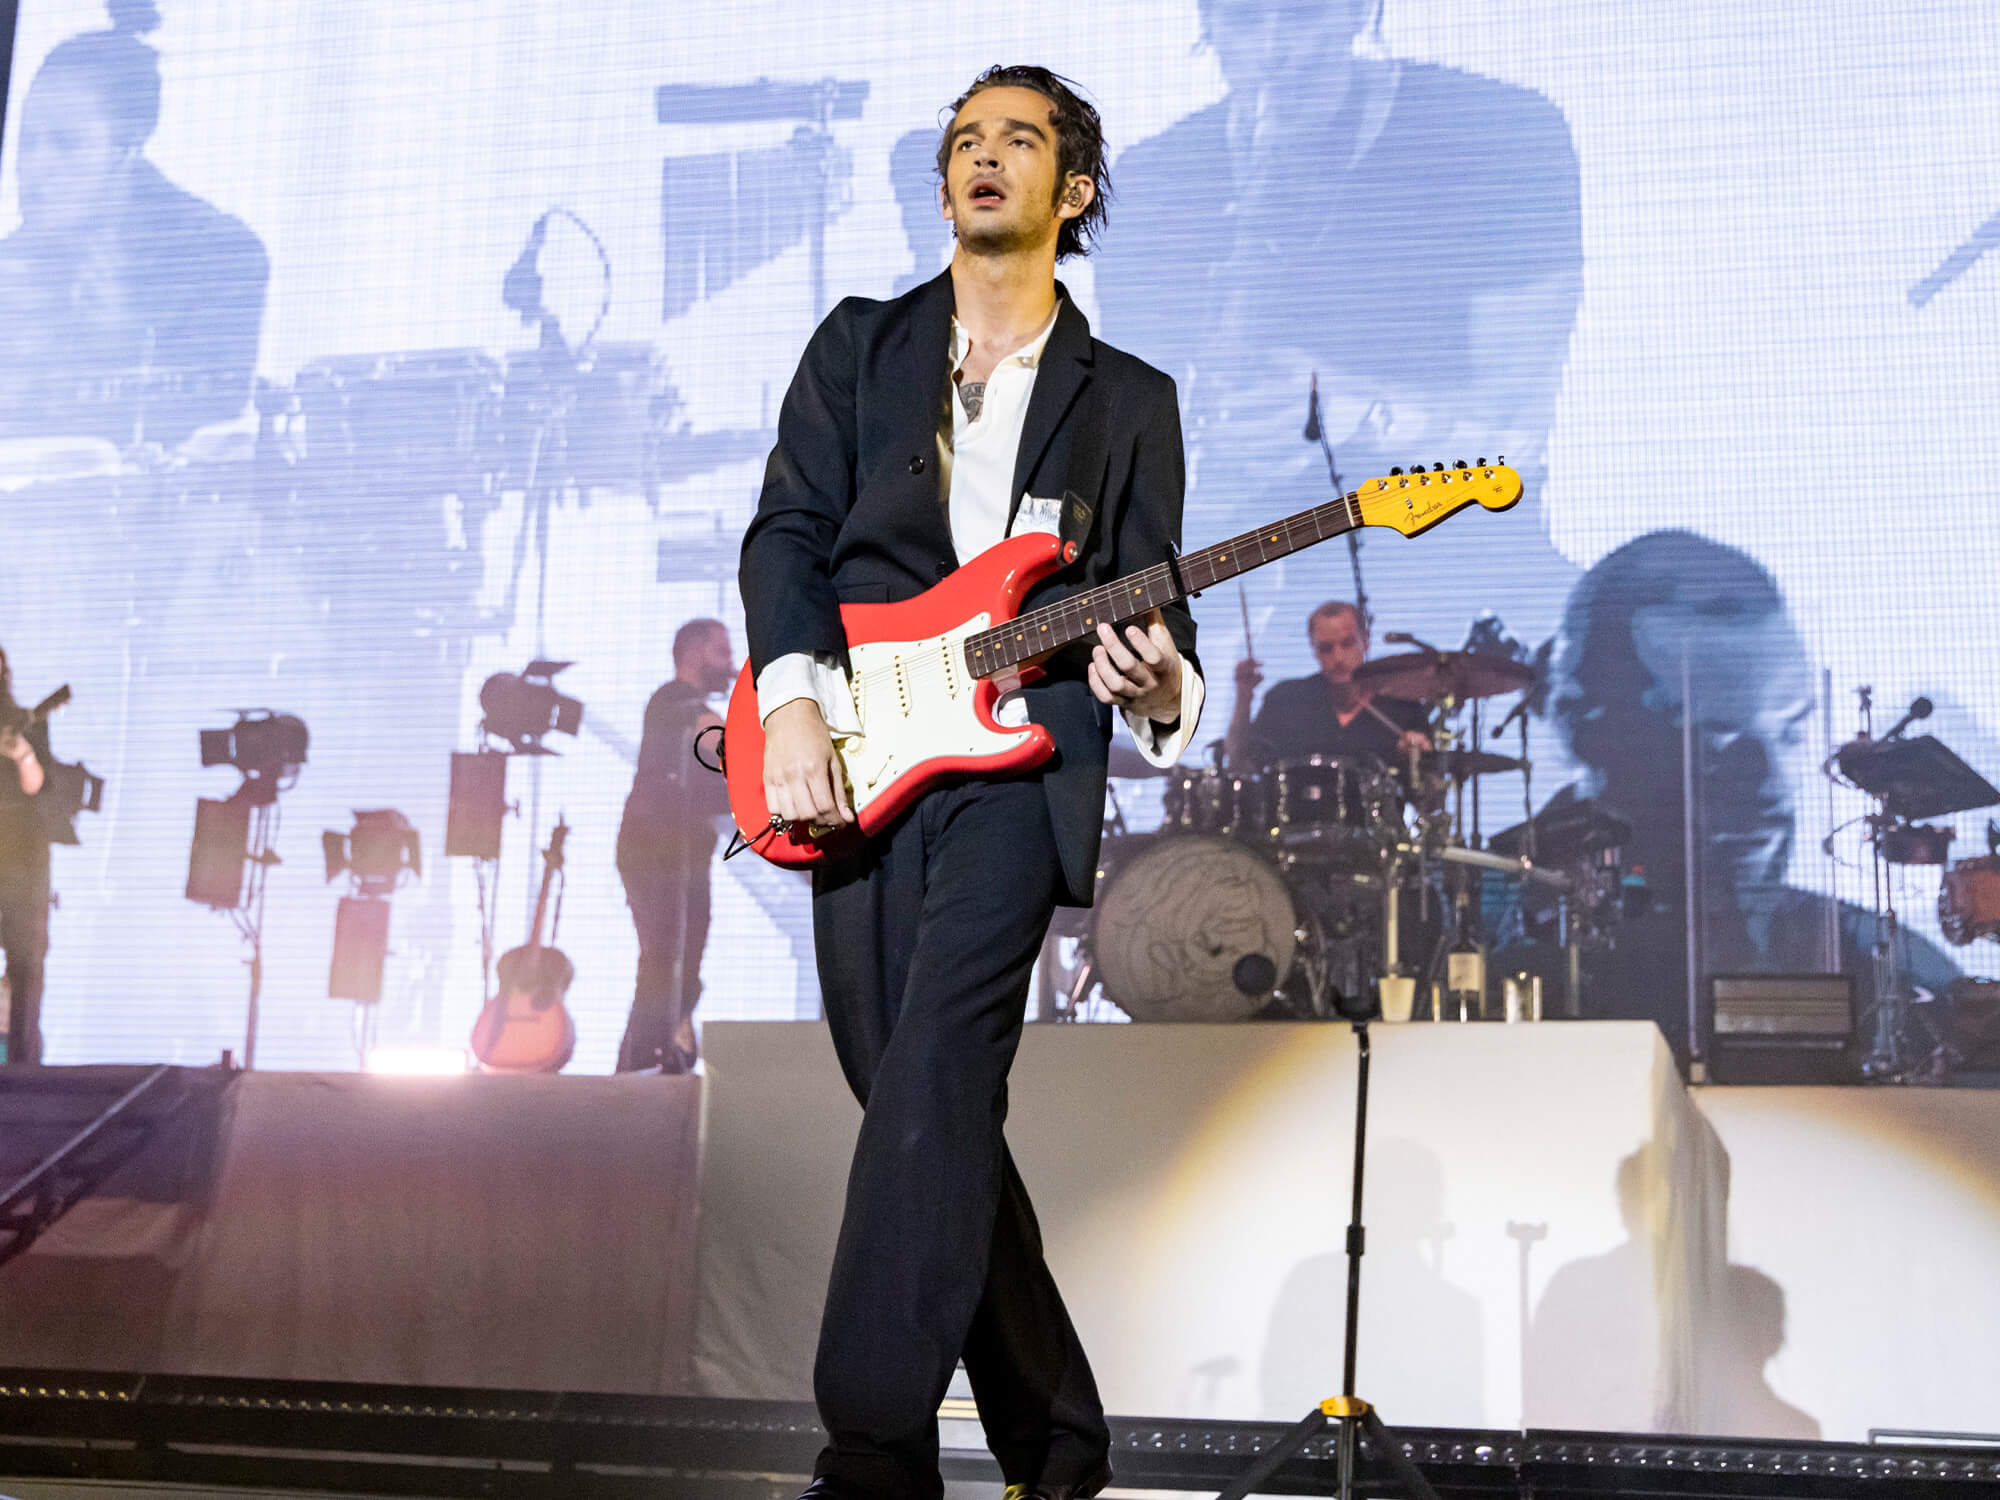 Matty Healy on stage wearing a suit and playing a red Stratocaster guitar